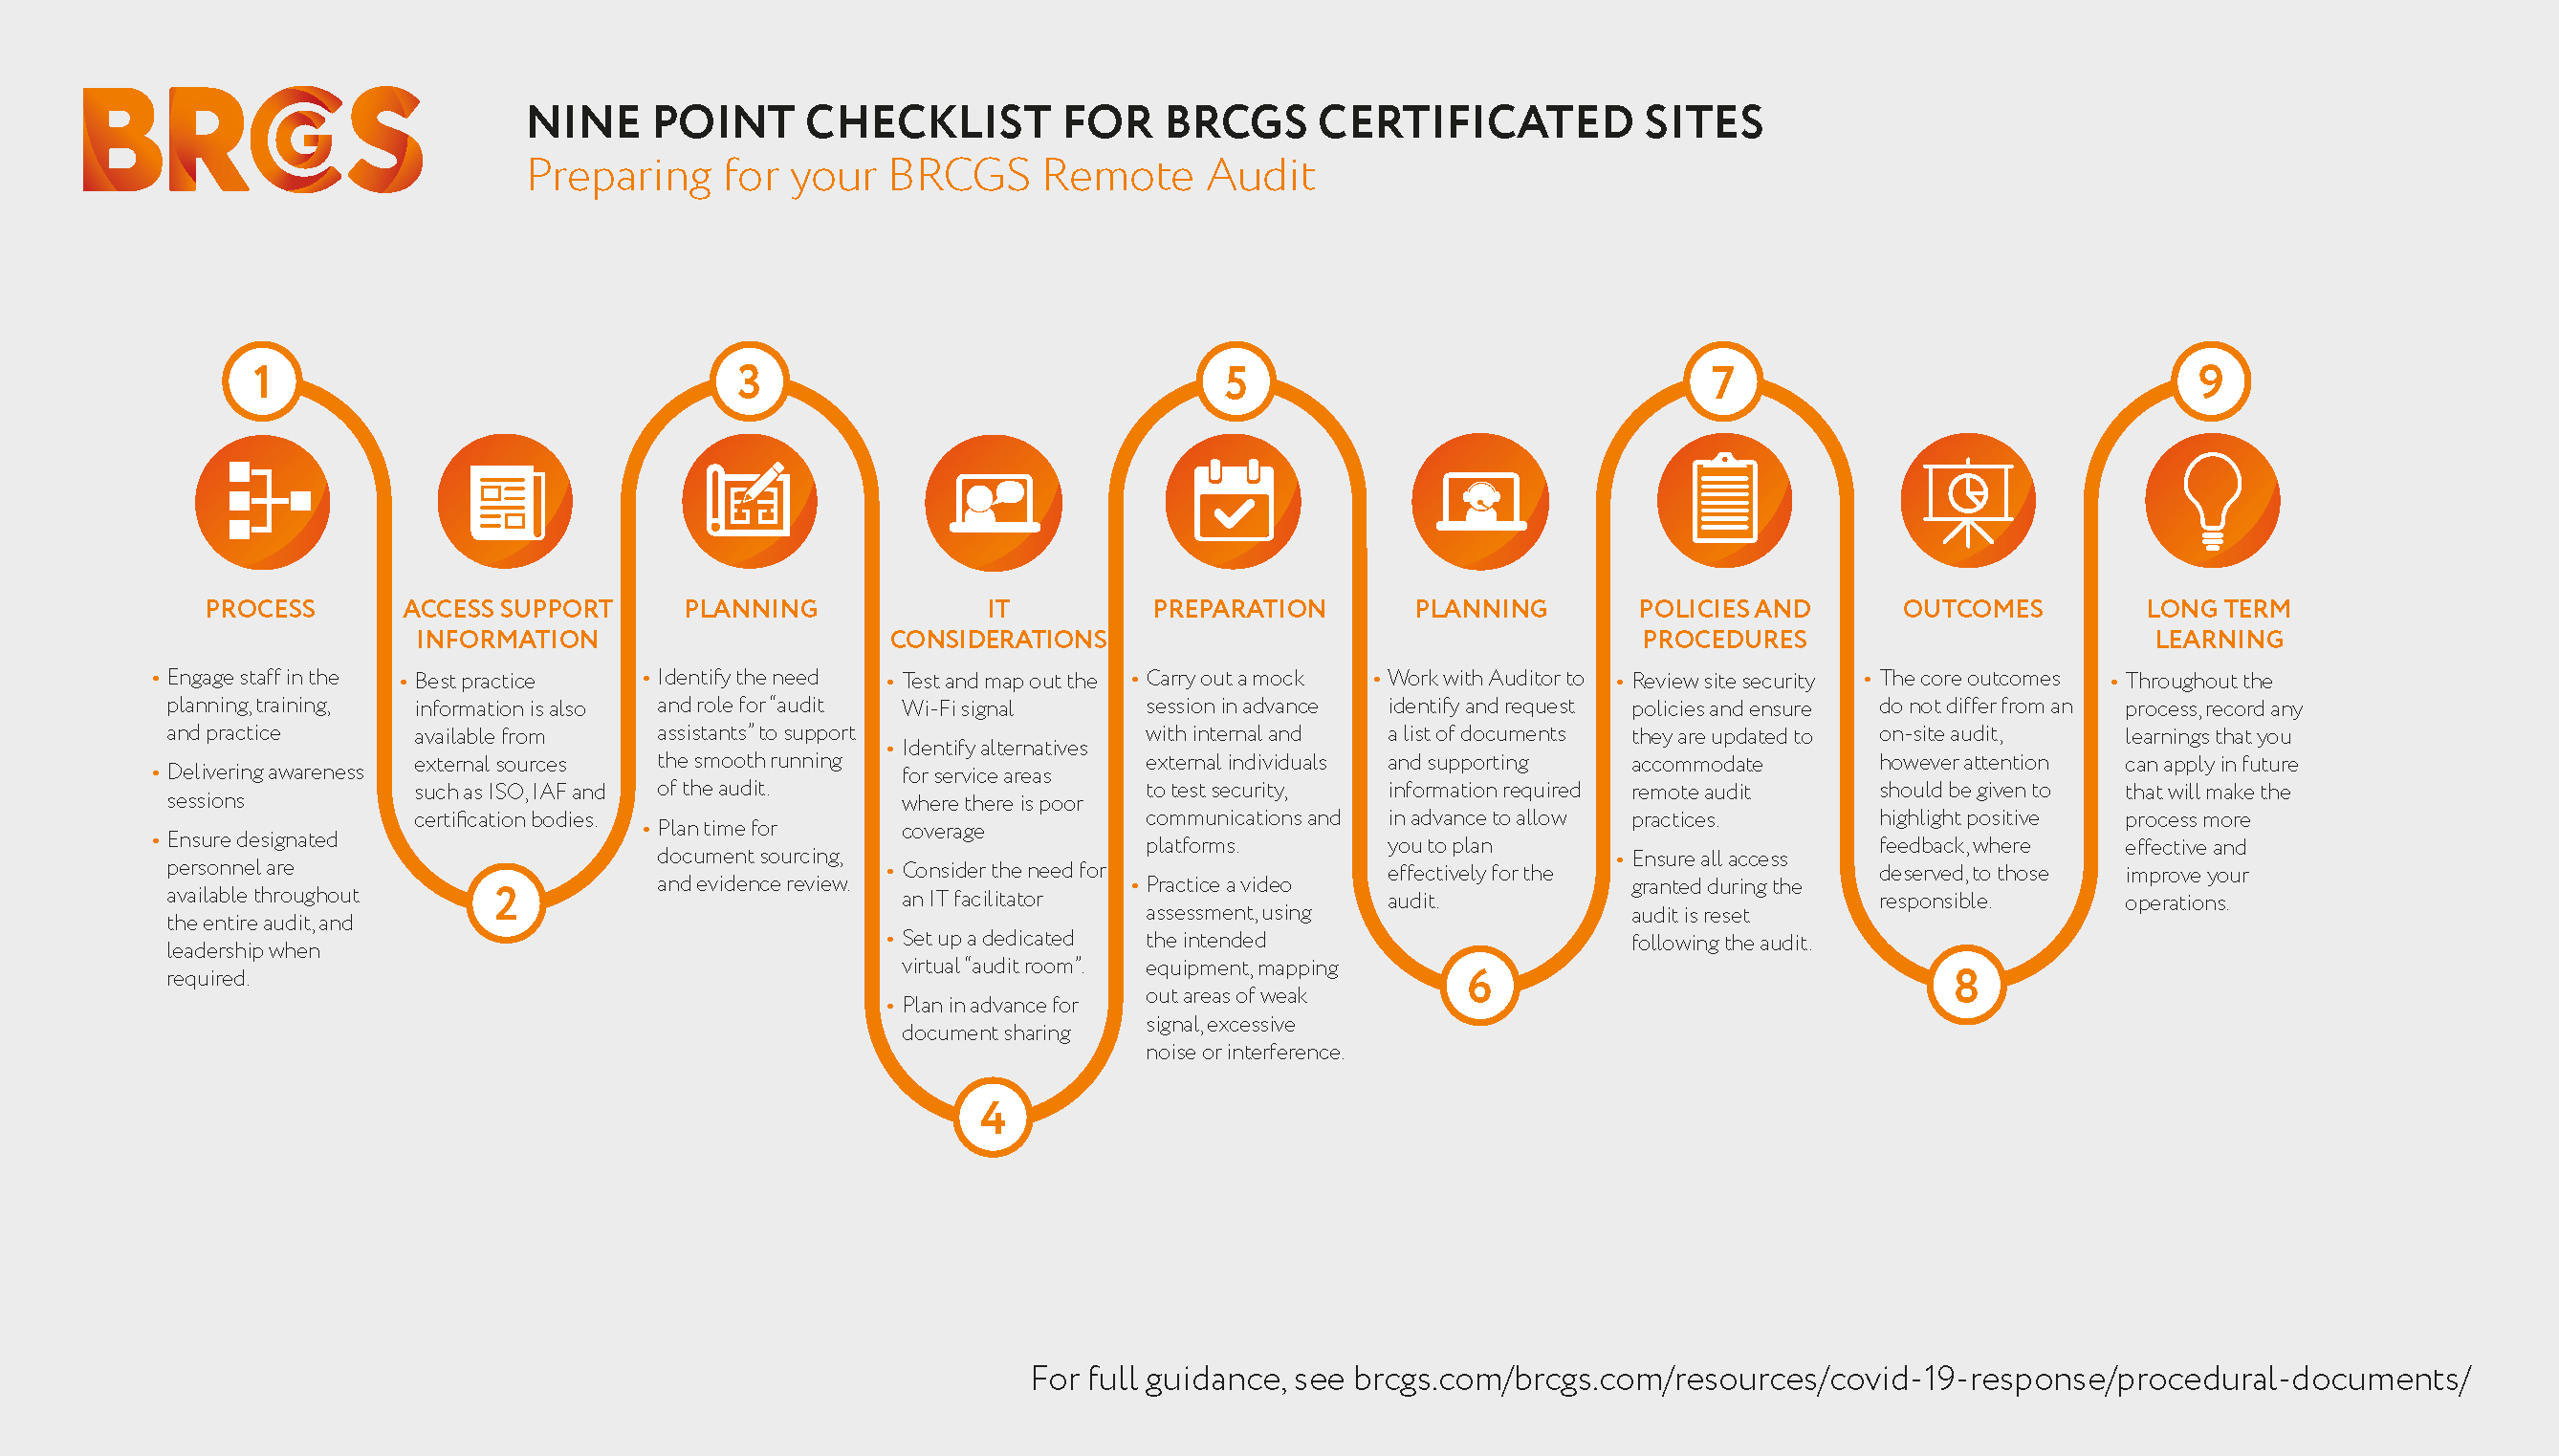 remote audit nine point checklist for BRCGS certified sites